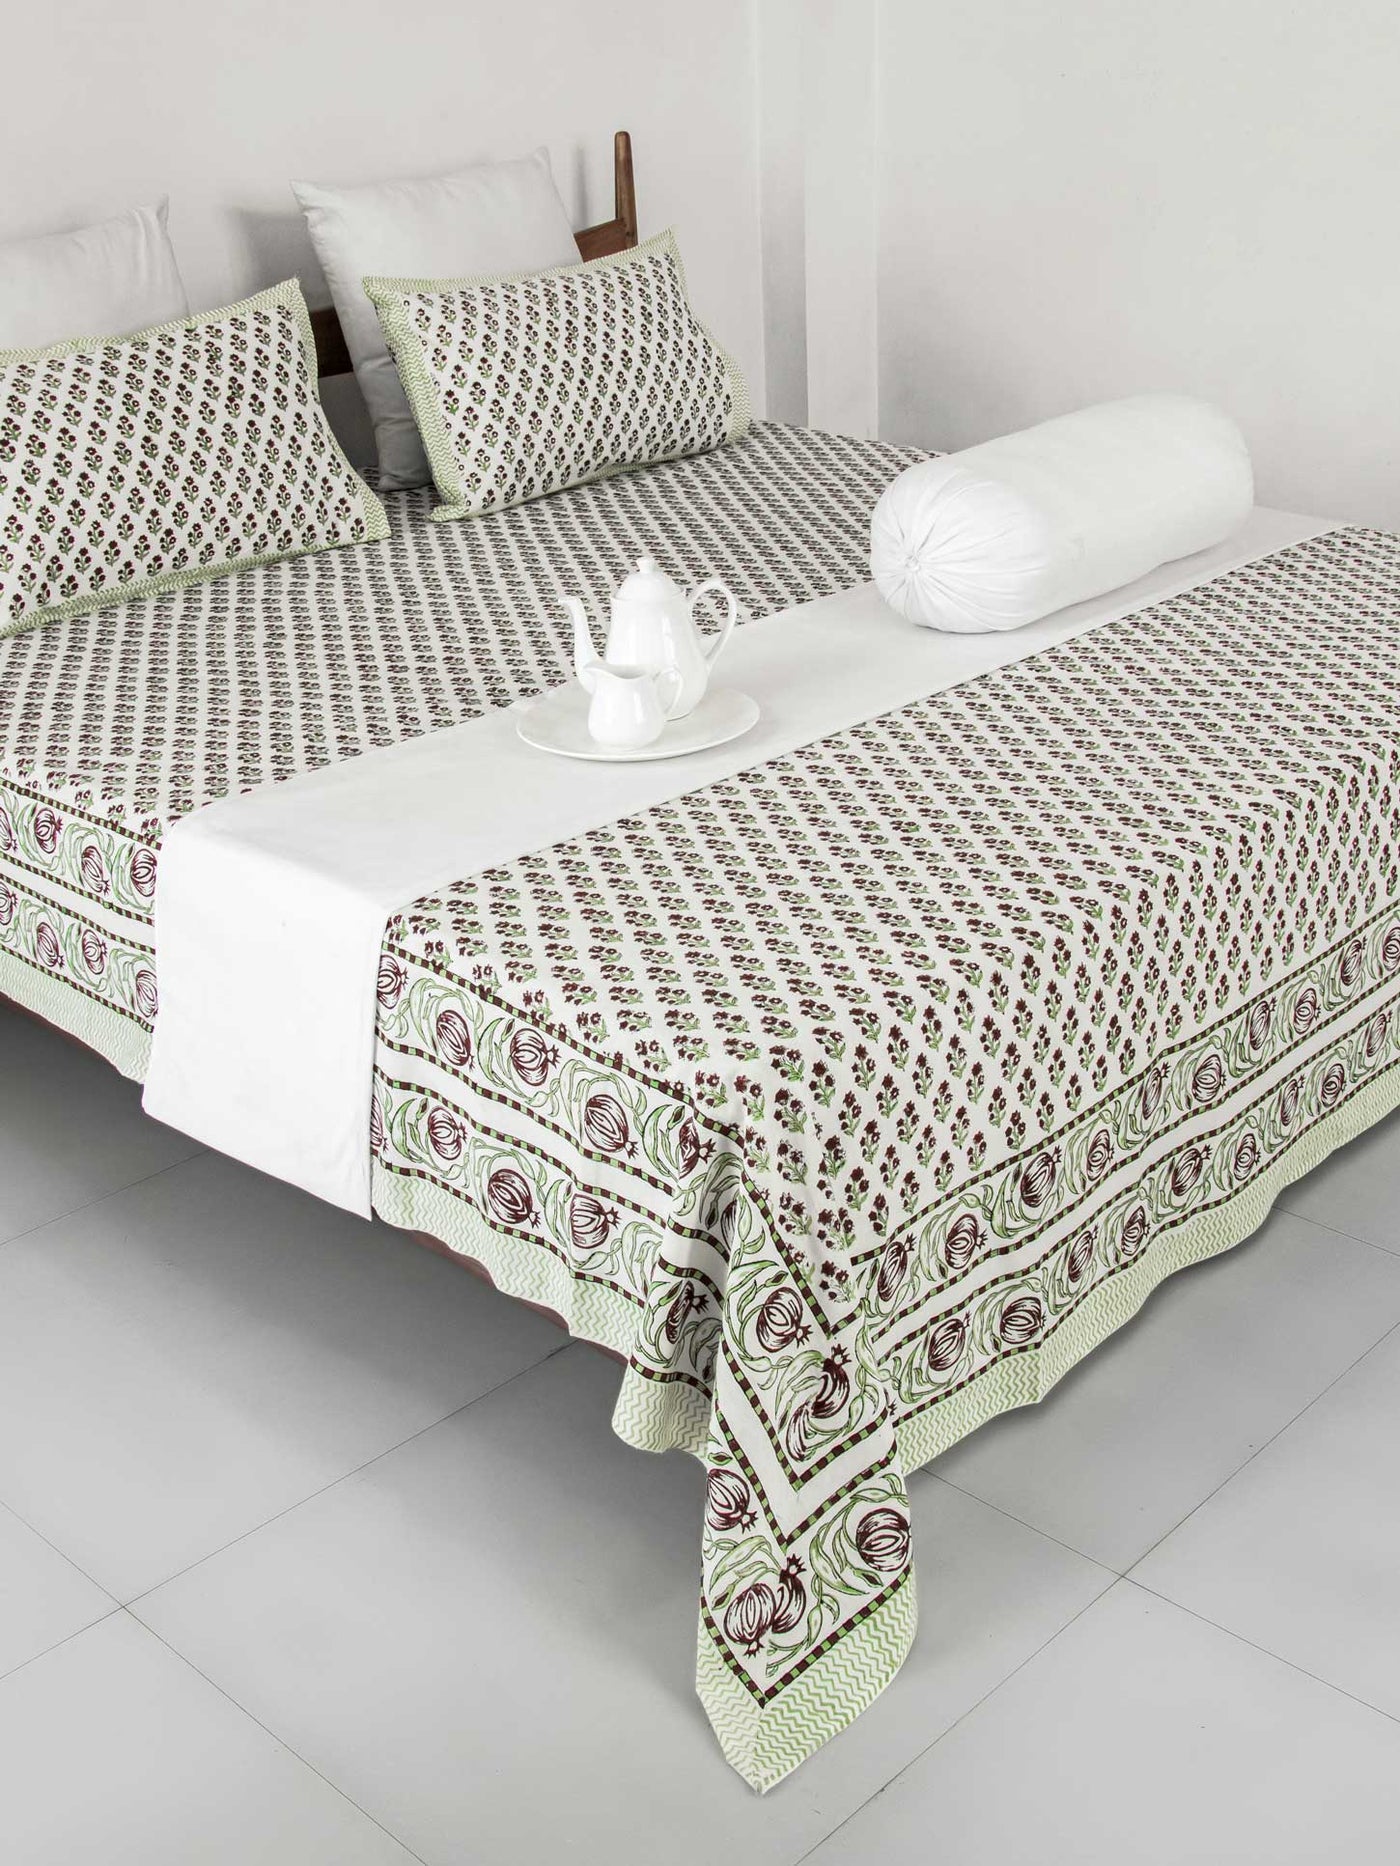 Red Mugal Booti design hand block Double Bedsheet with Annar border